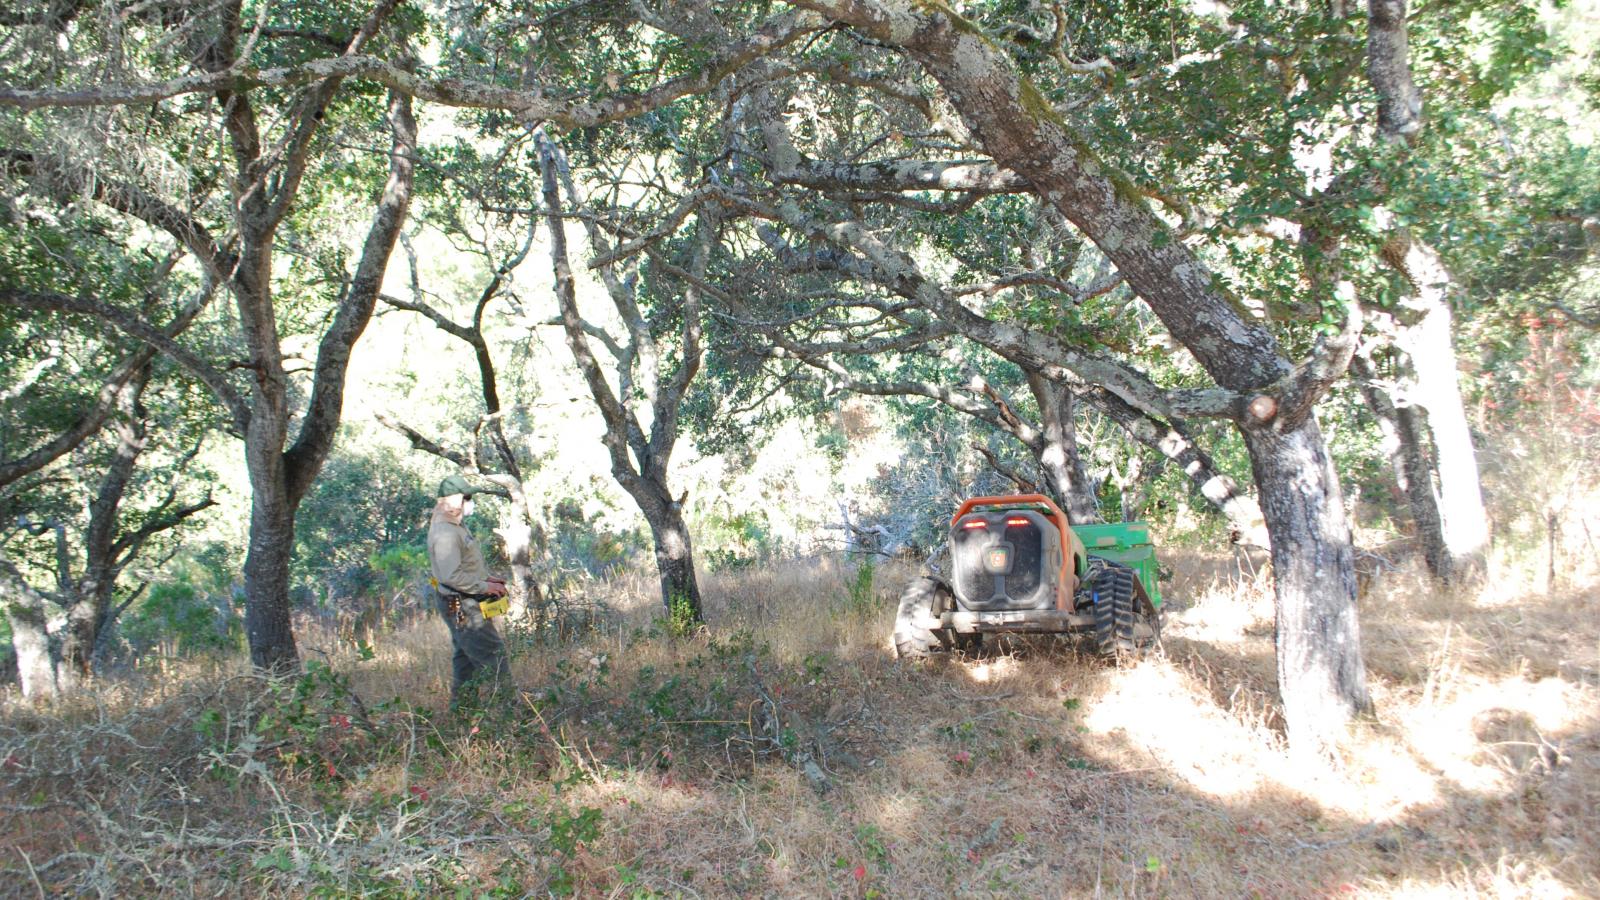 Midpen staff operate a remote control mower to create defensible space at Pulgas Ridge Preserve. (Leigh Ann Gessner)